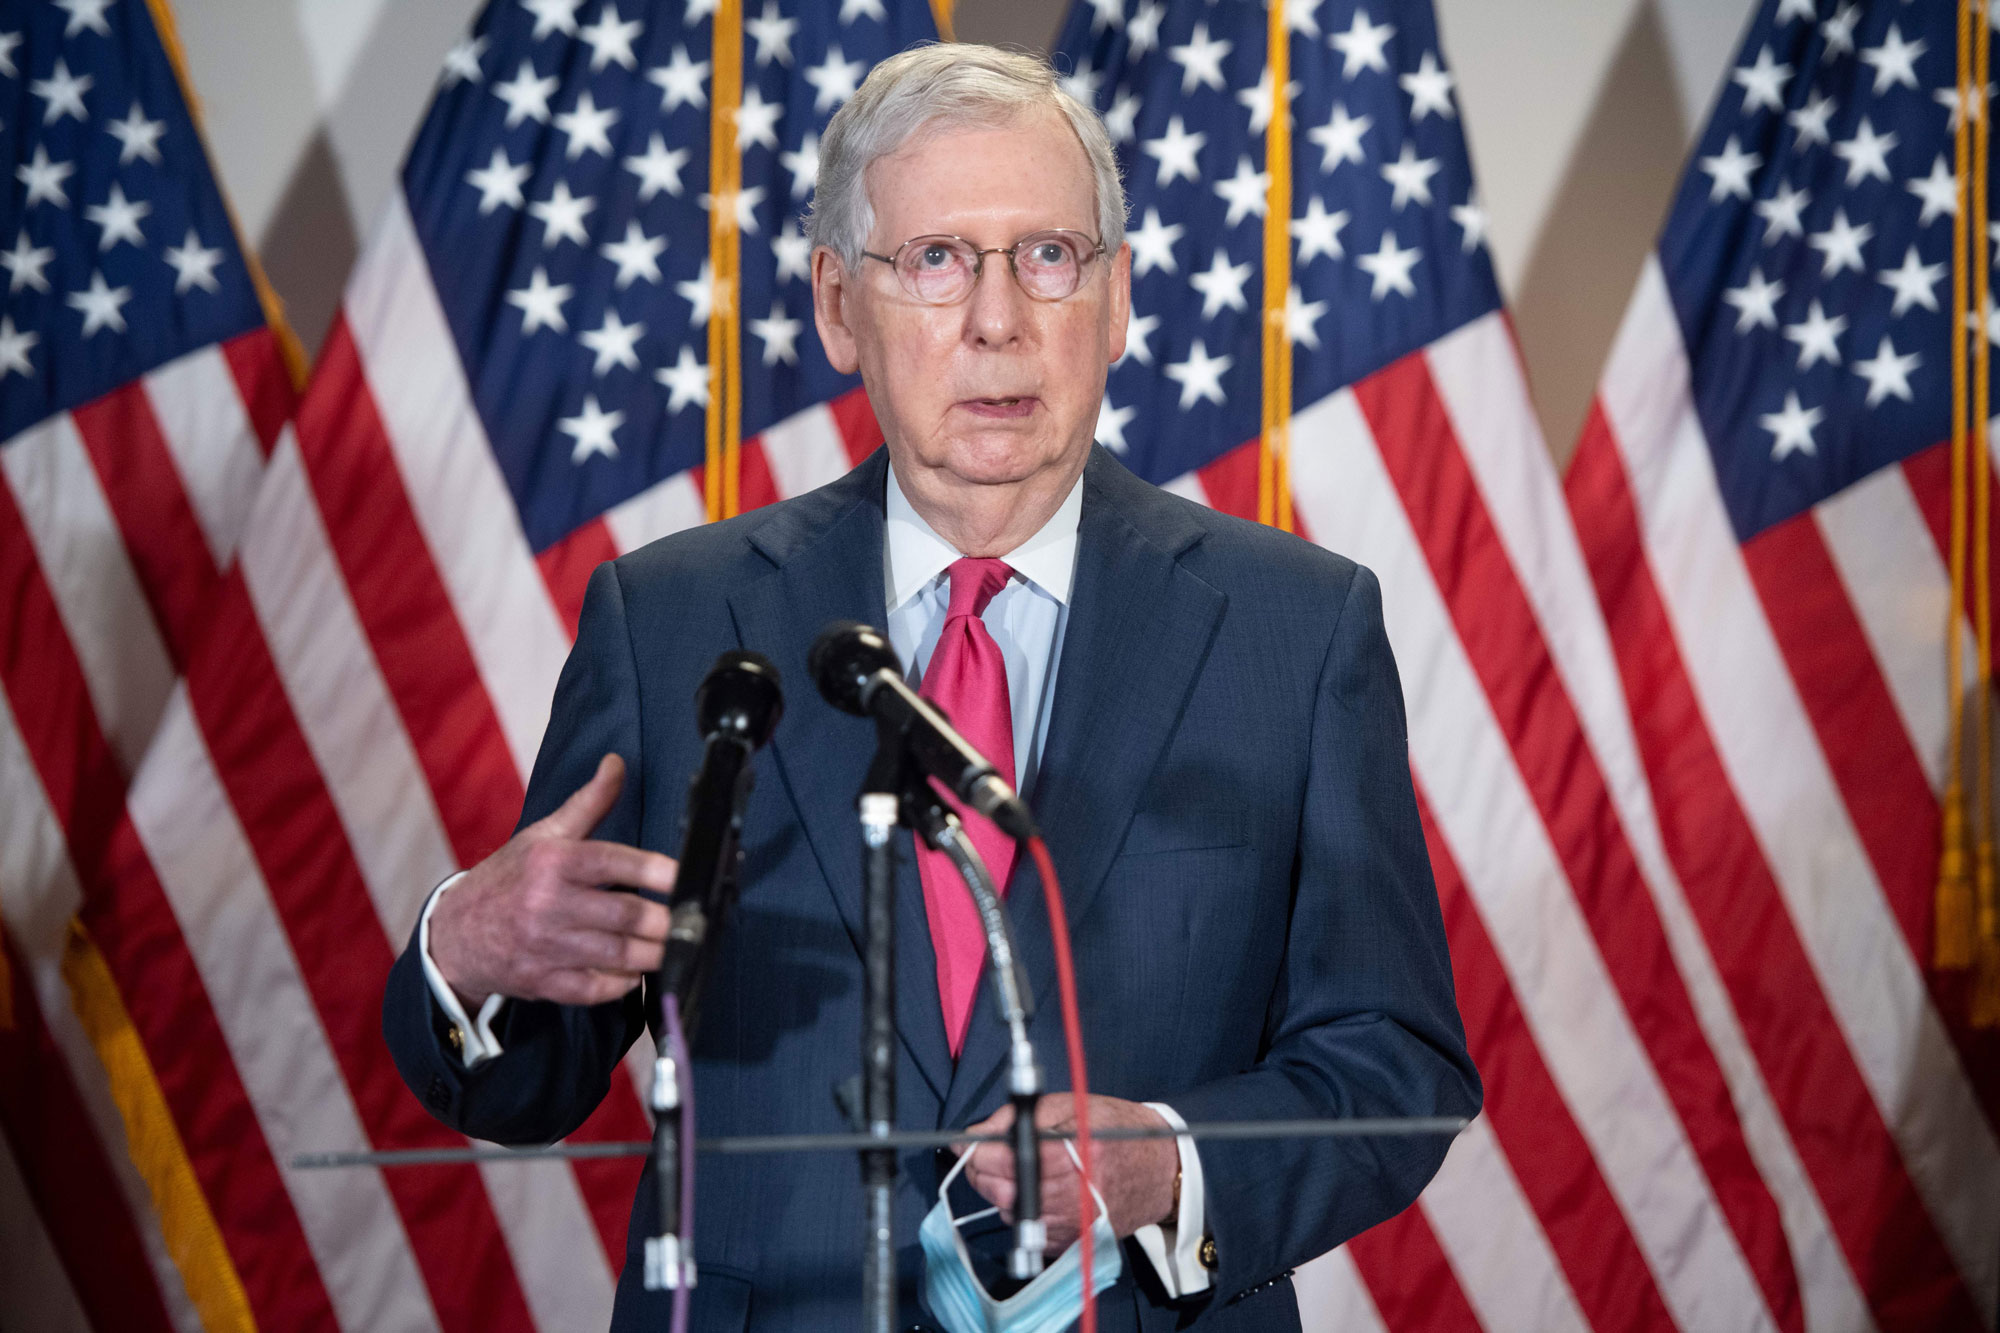 US Senate Majority Leader Mitch McConnell, Republican of Kentucky, speaks to the media following the weekly Republican Senate policy luncheon on Capitol Hill in Washington on May 19.